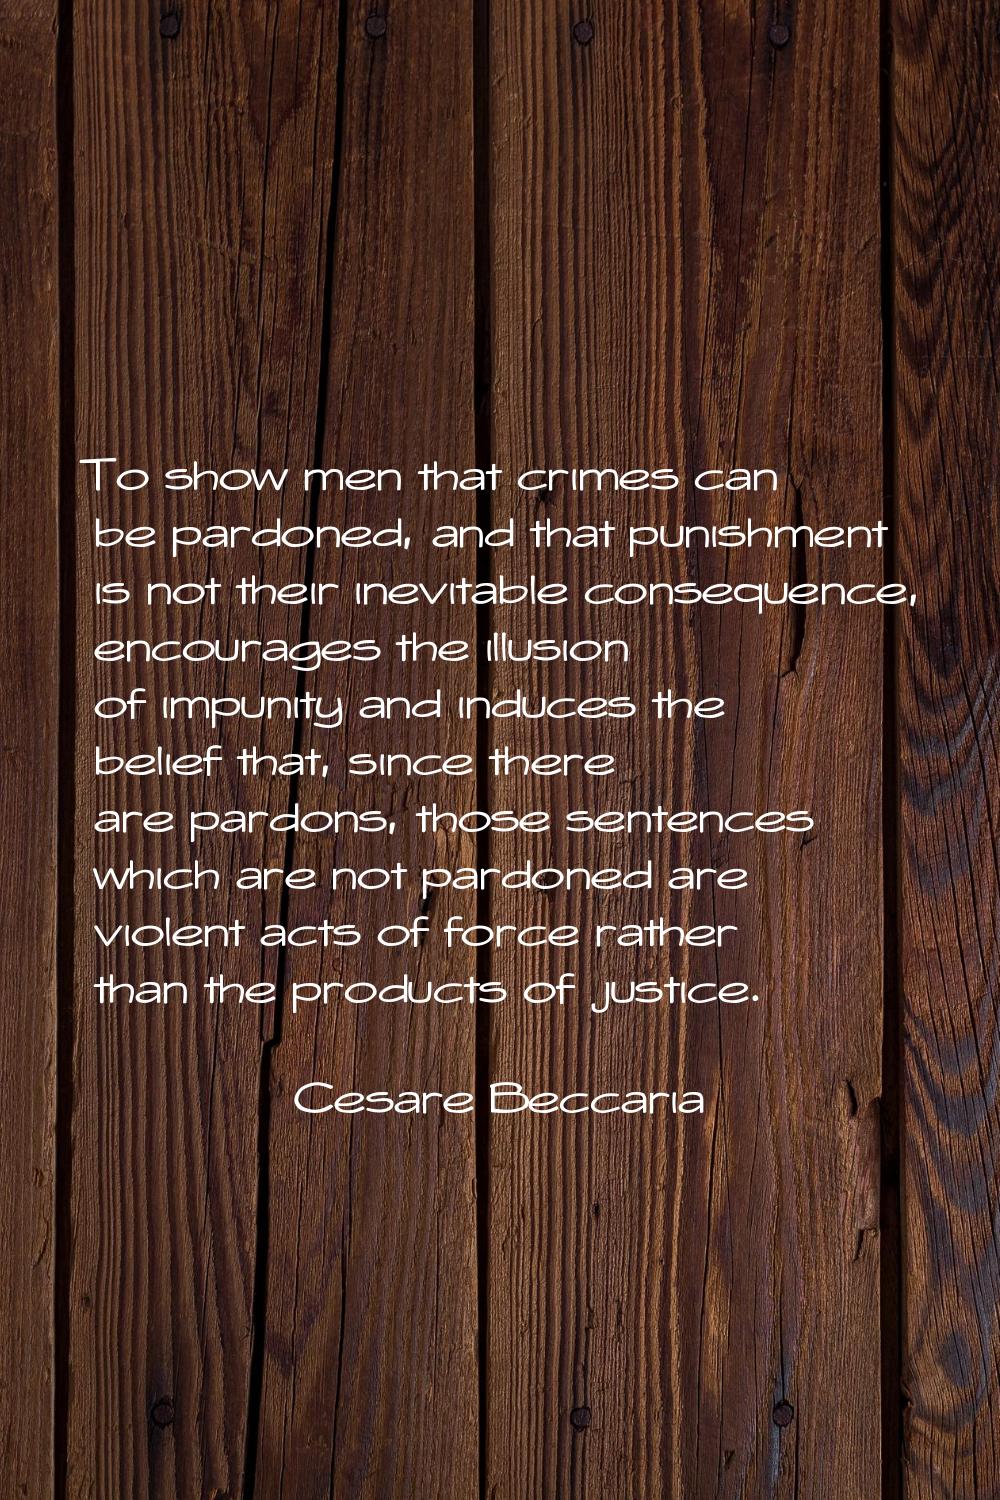 To show men that crimes can be pardoned, and that punishment is not their inevitable consequence, e